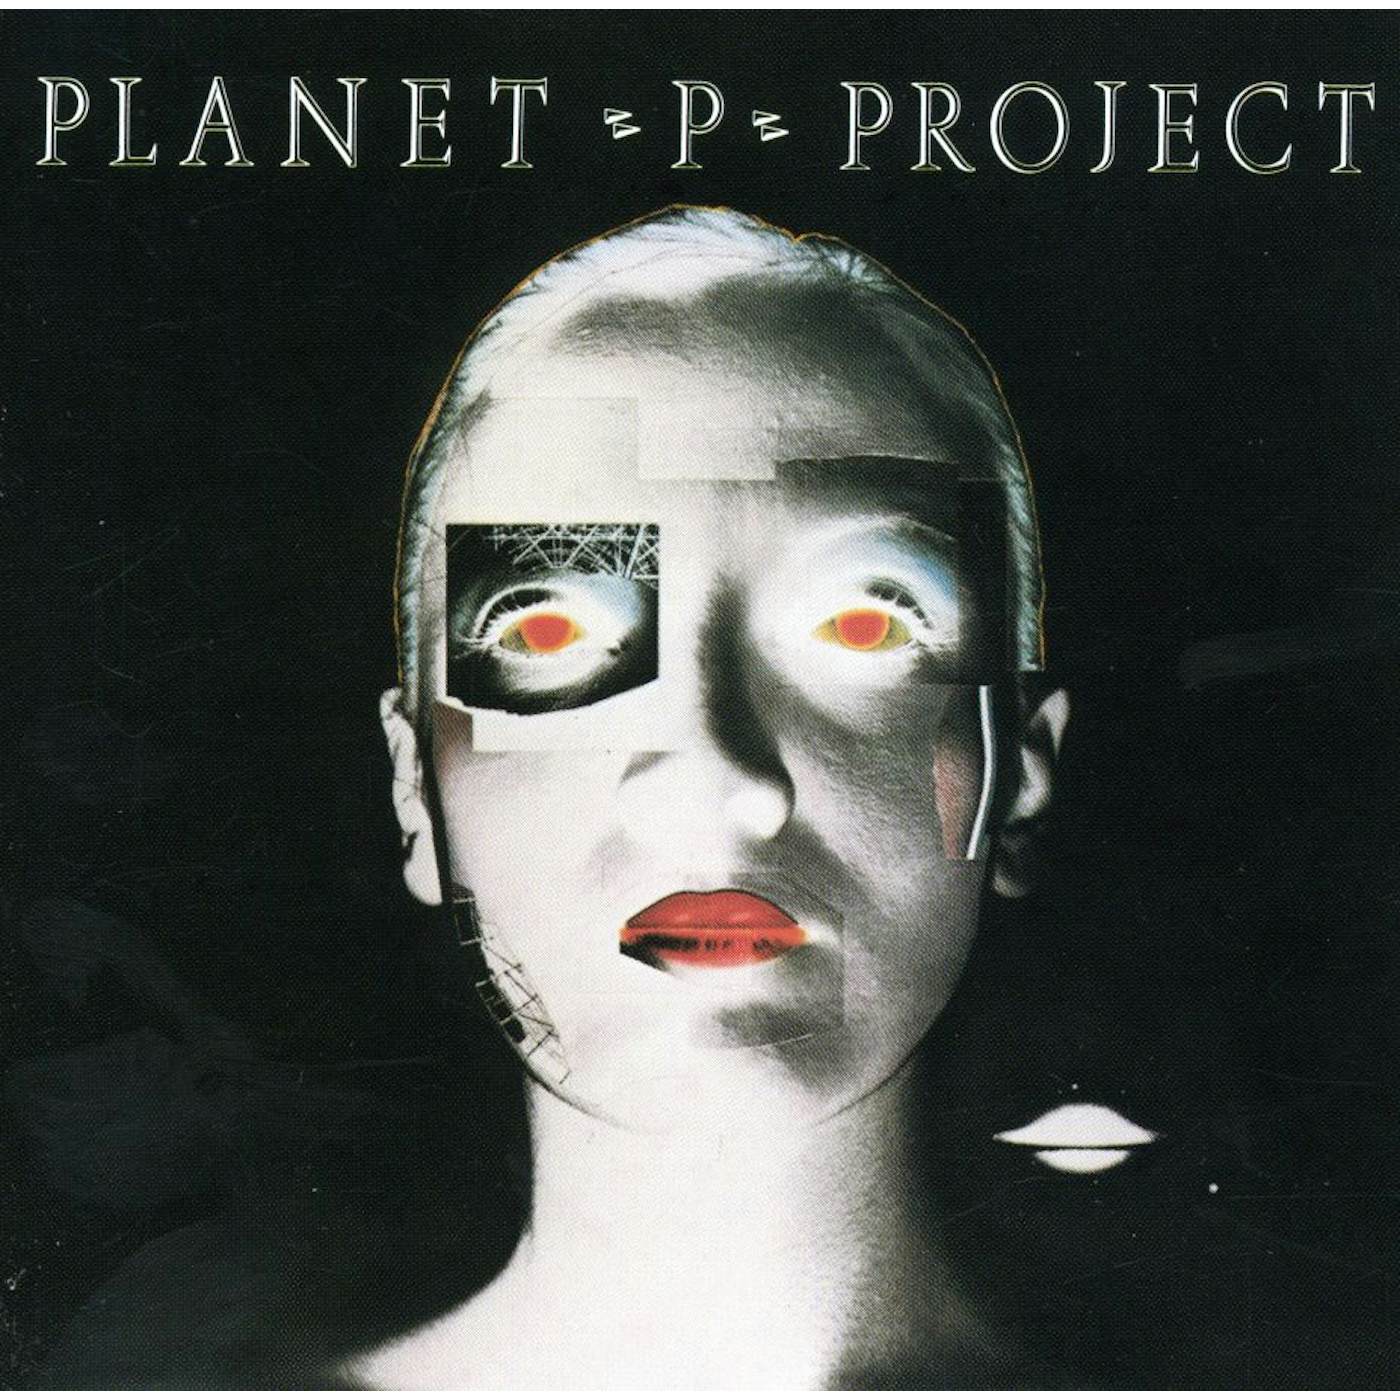 PLANET P PROJECT CD